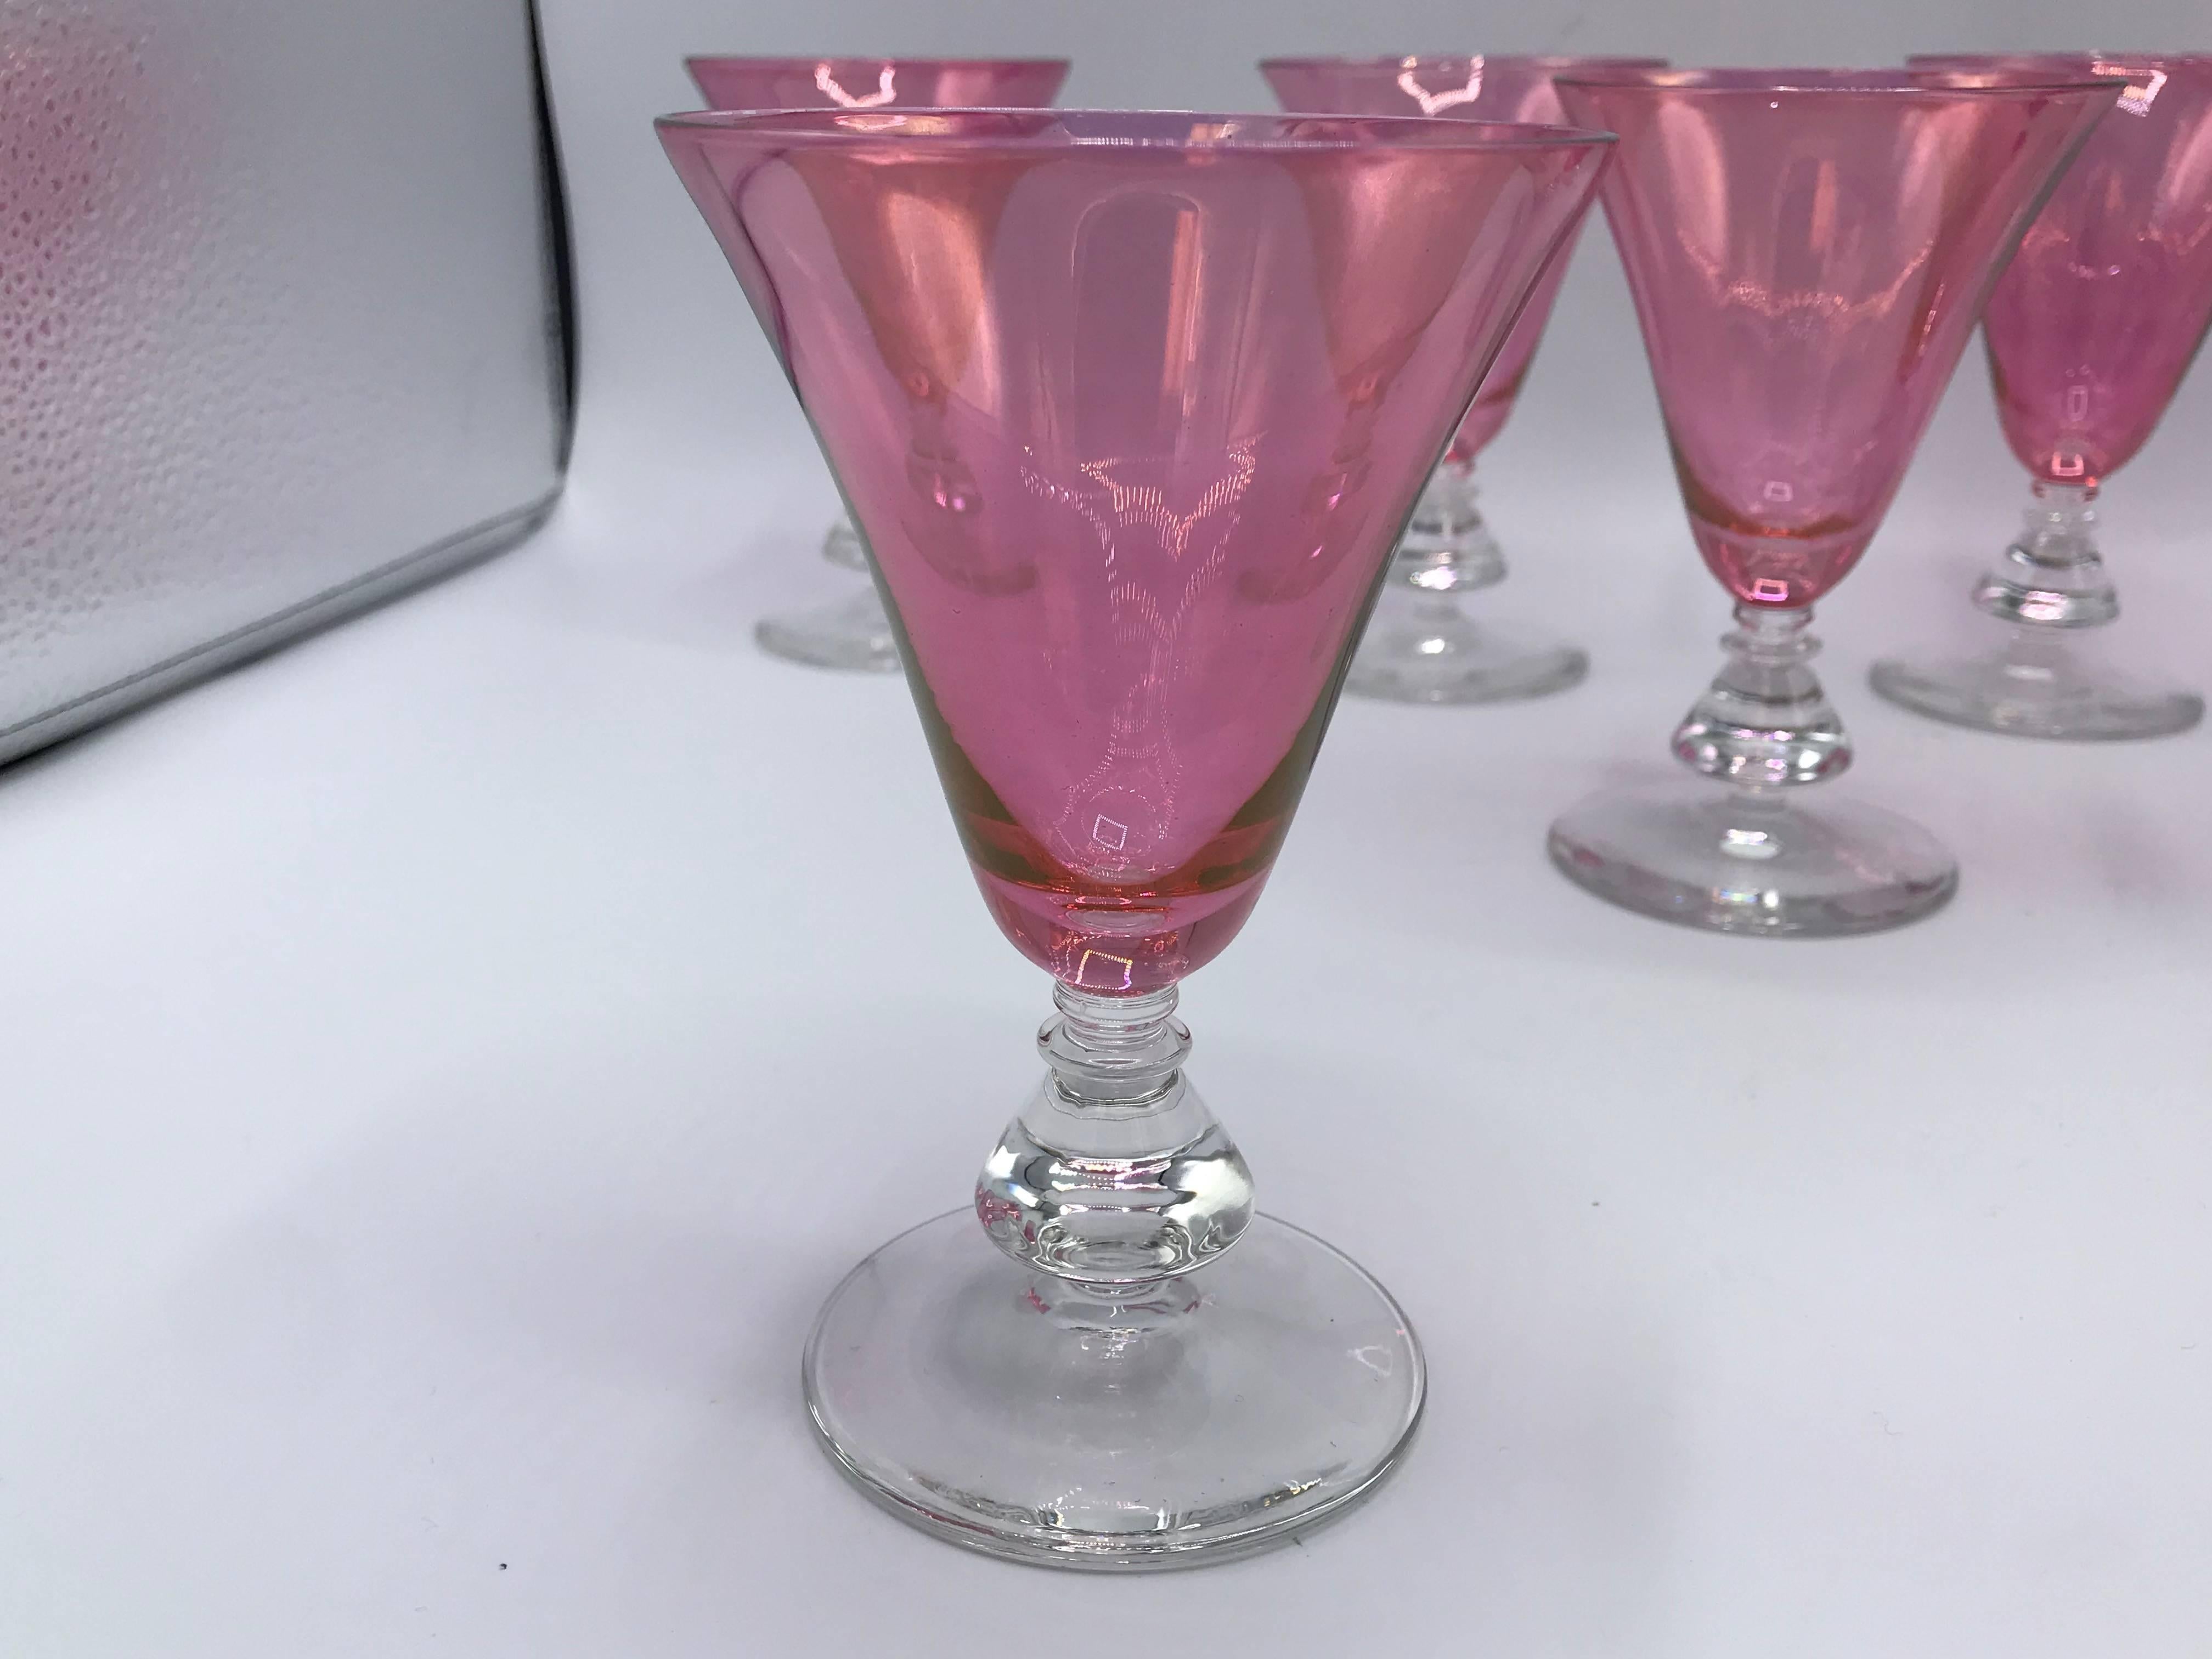 Offered is an exquisite, set of eight, 1960s Italian Murano glass stemmed cocktail glasses. Stunning ballet-slipper flamingo pink on clear-glass stem.